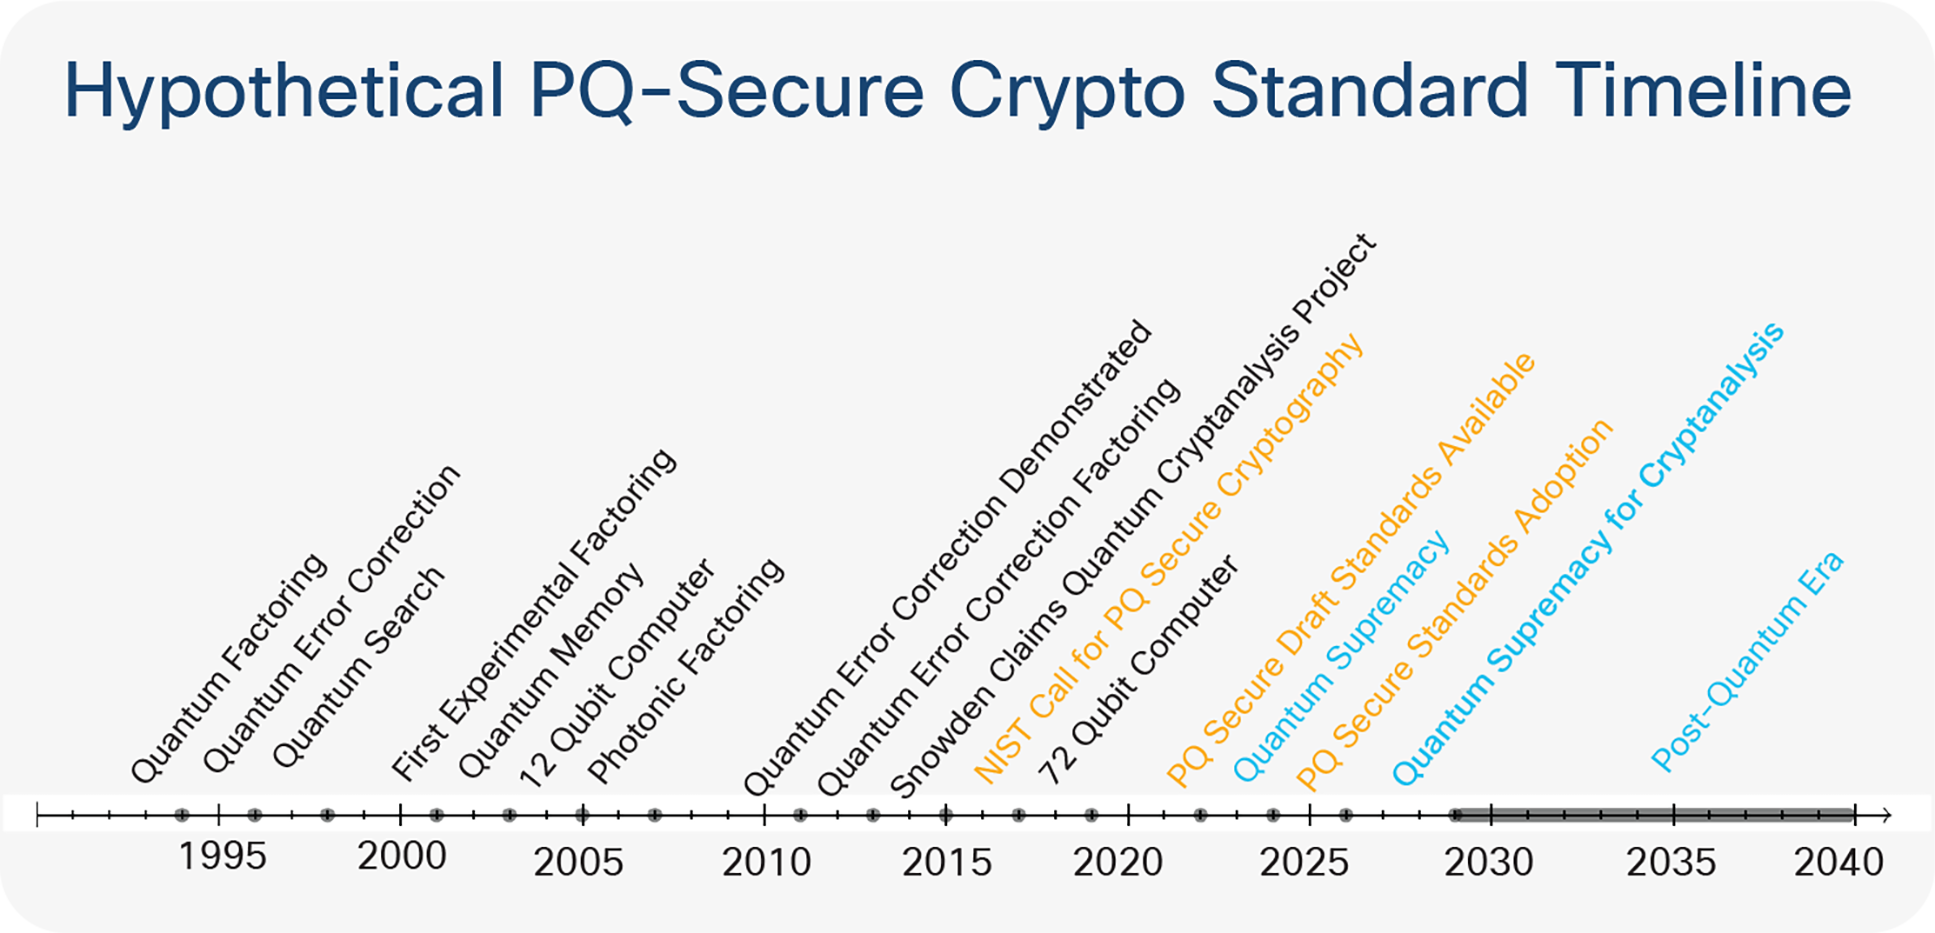 Timeline for various quantum cryptography standards